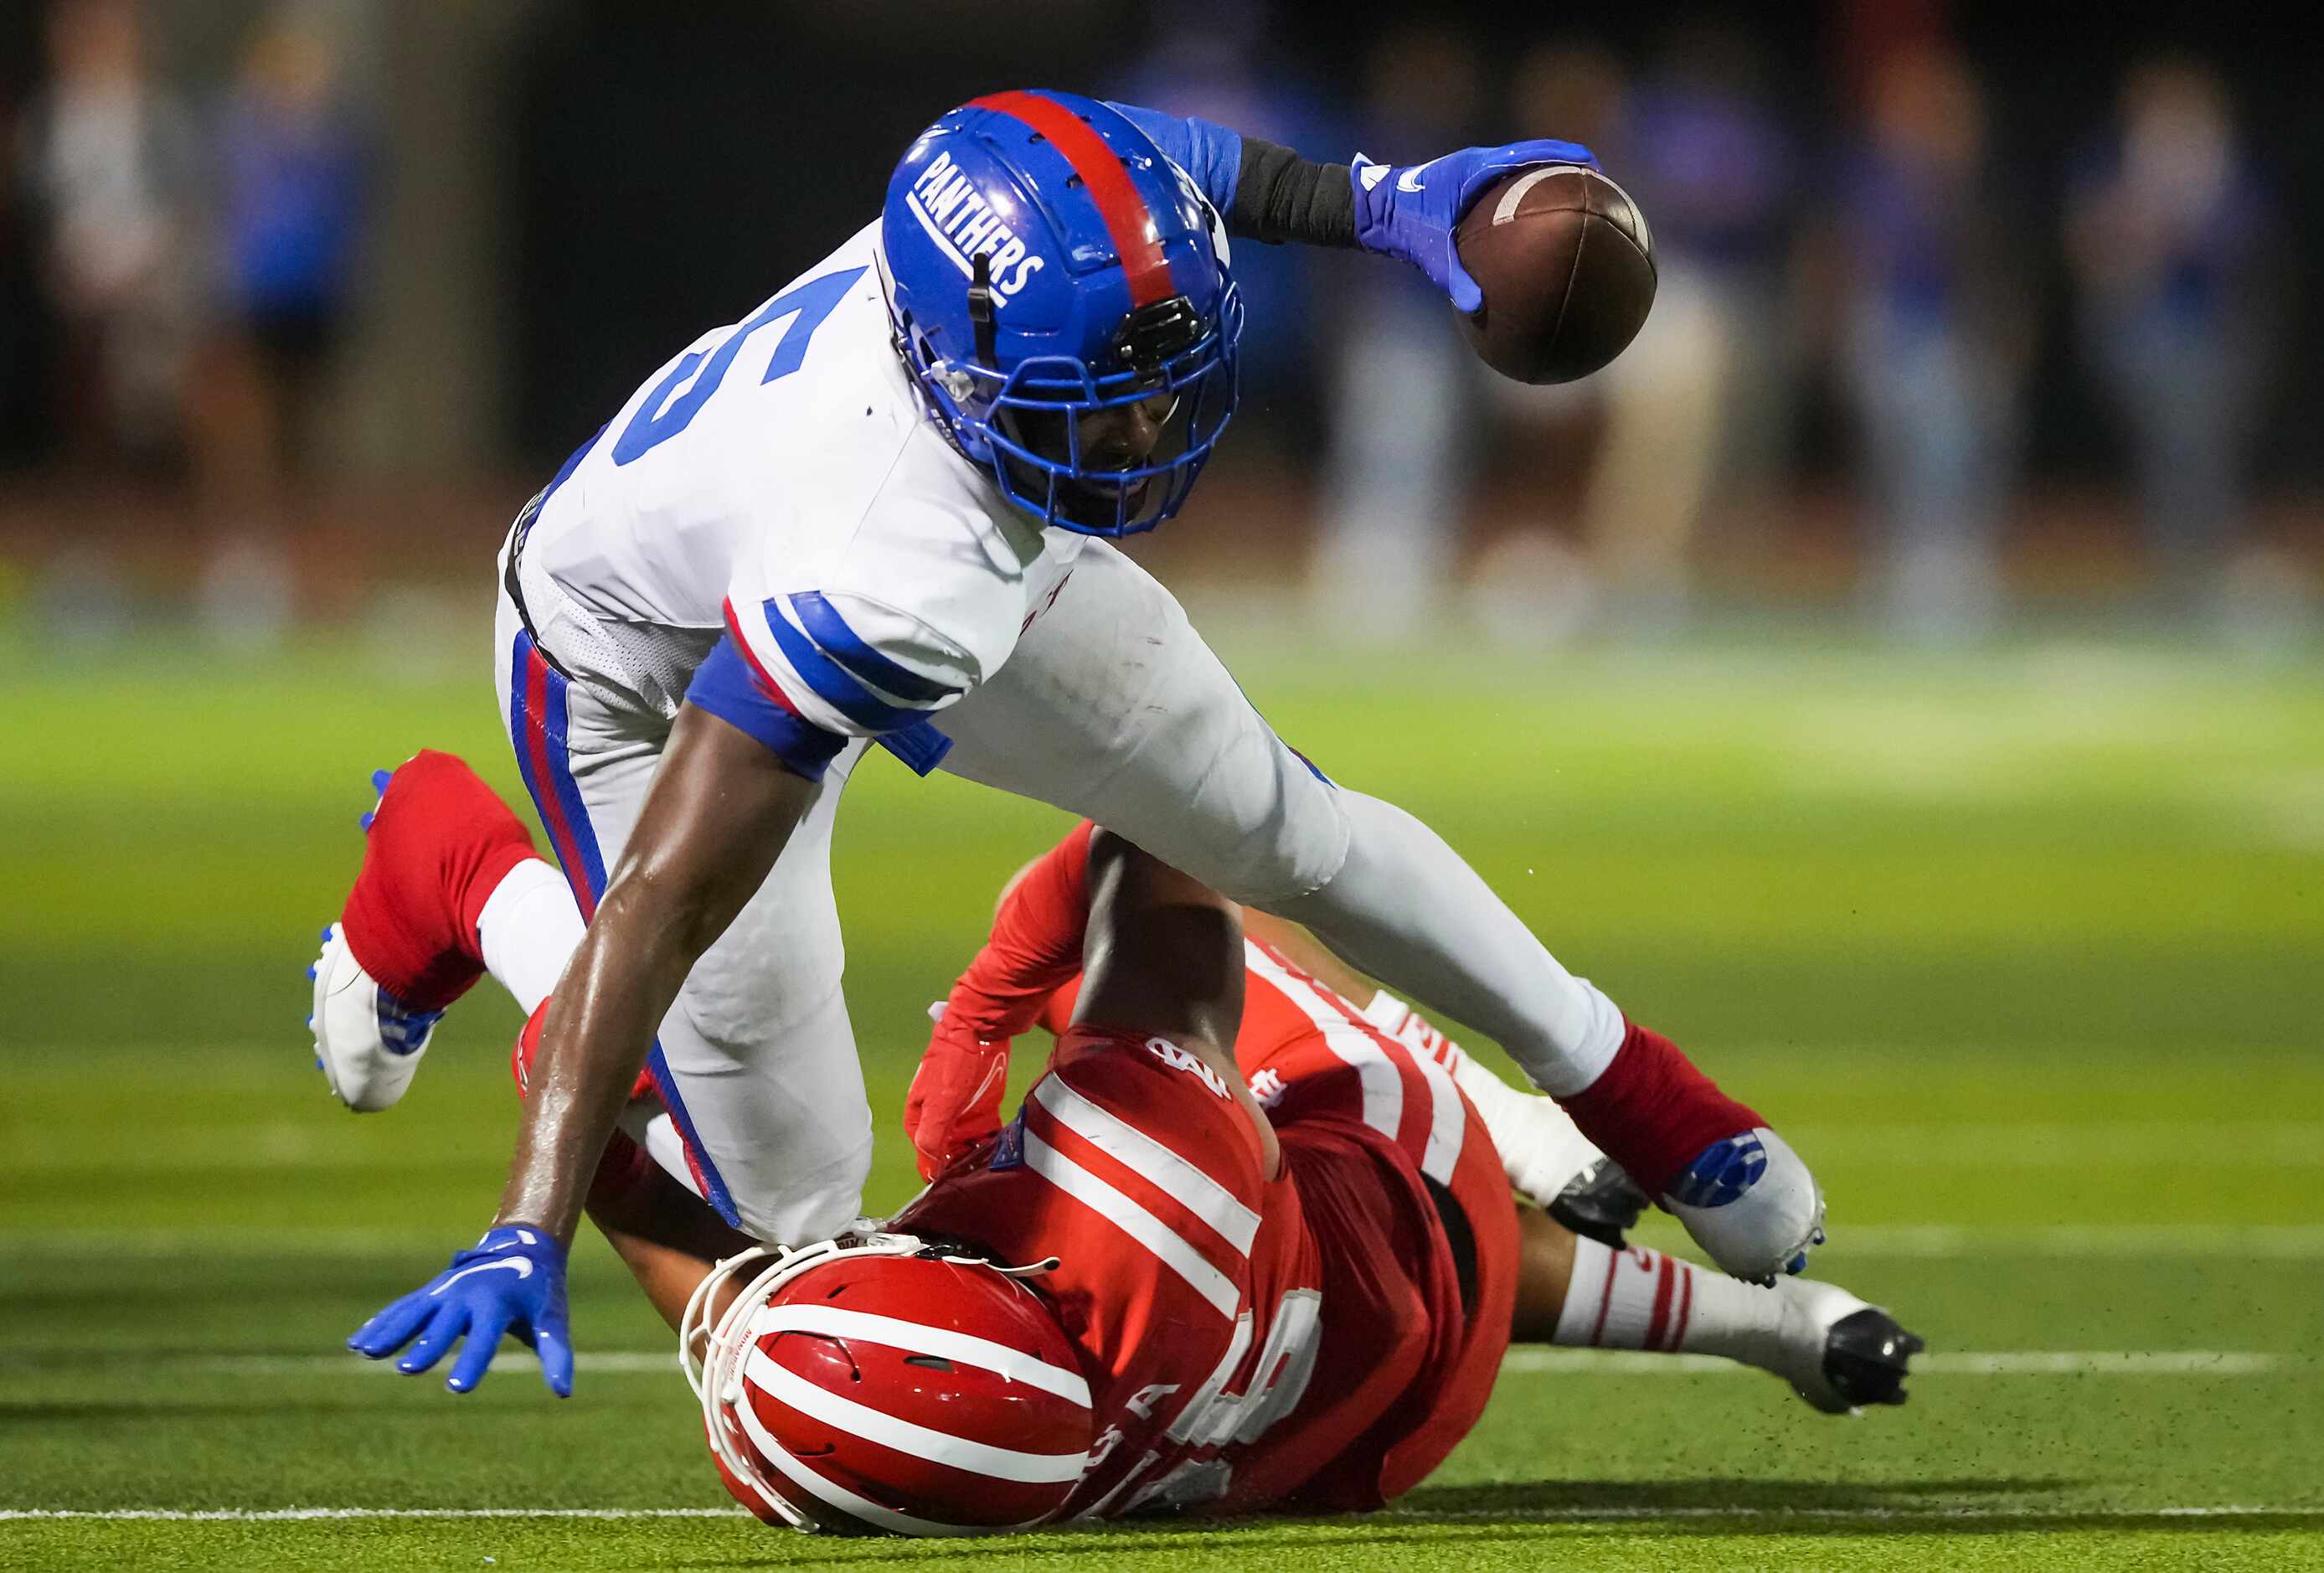 Duncanville running back Malachi Medlock (5) is brought down by Mater Dei linebacker ...